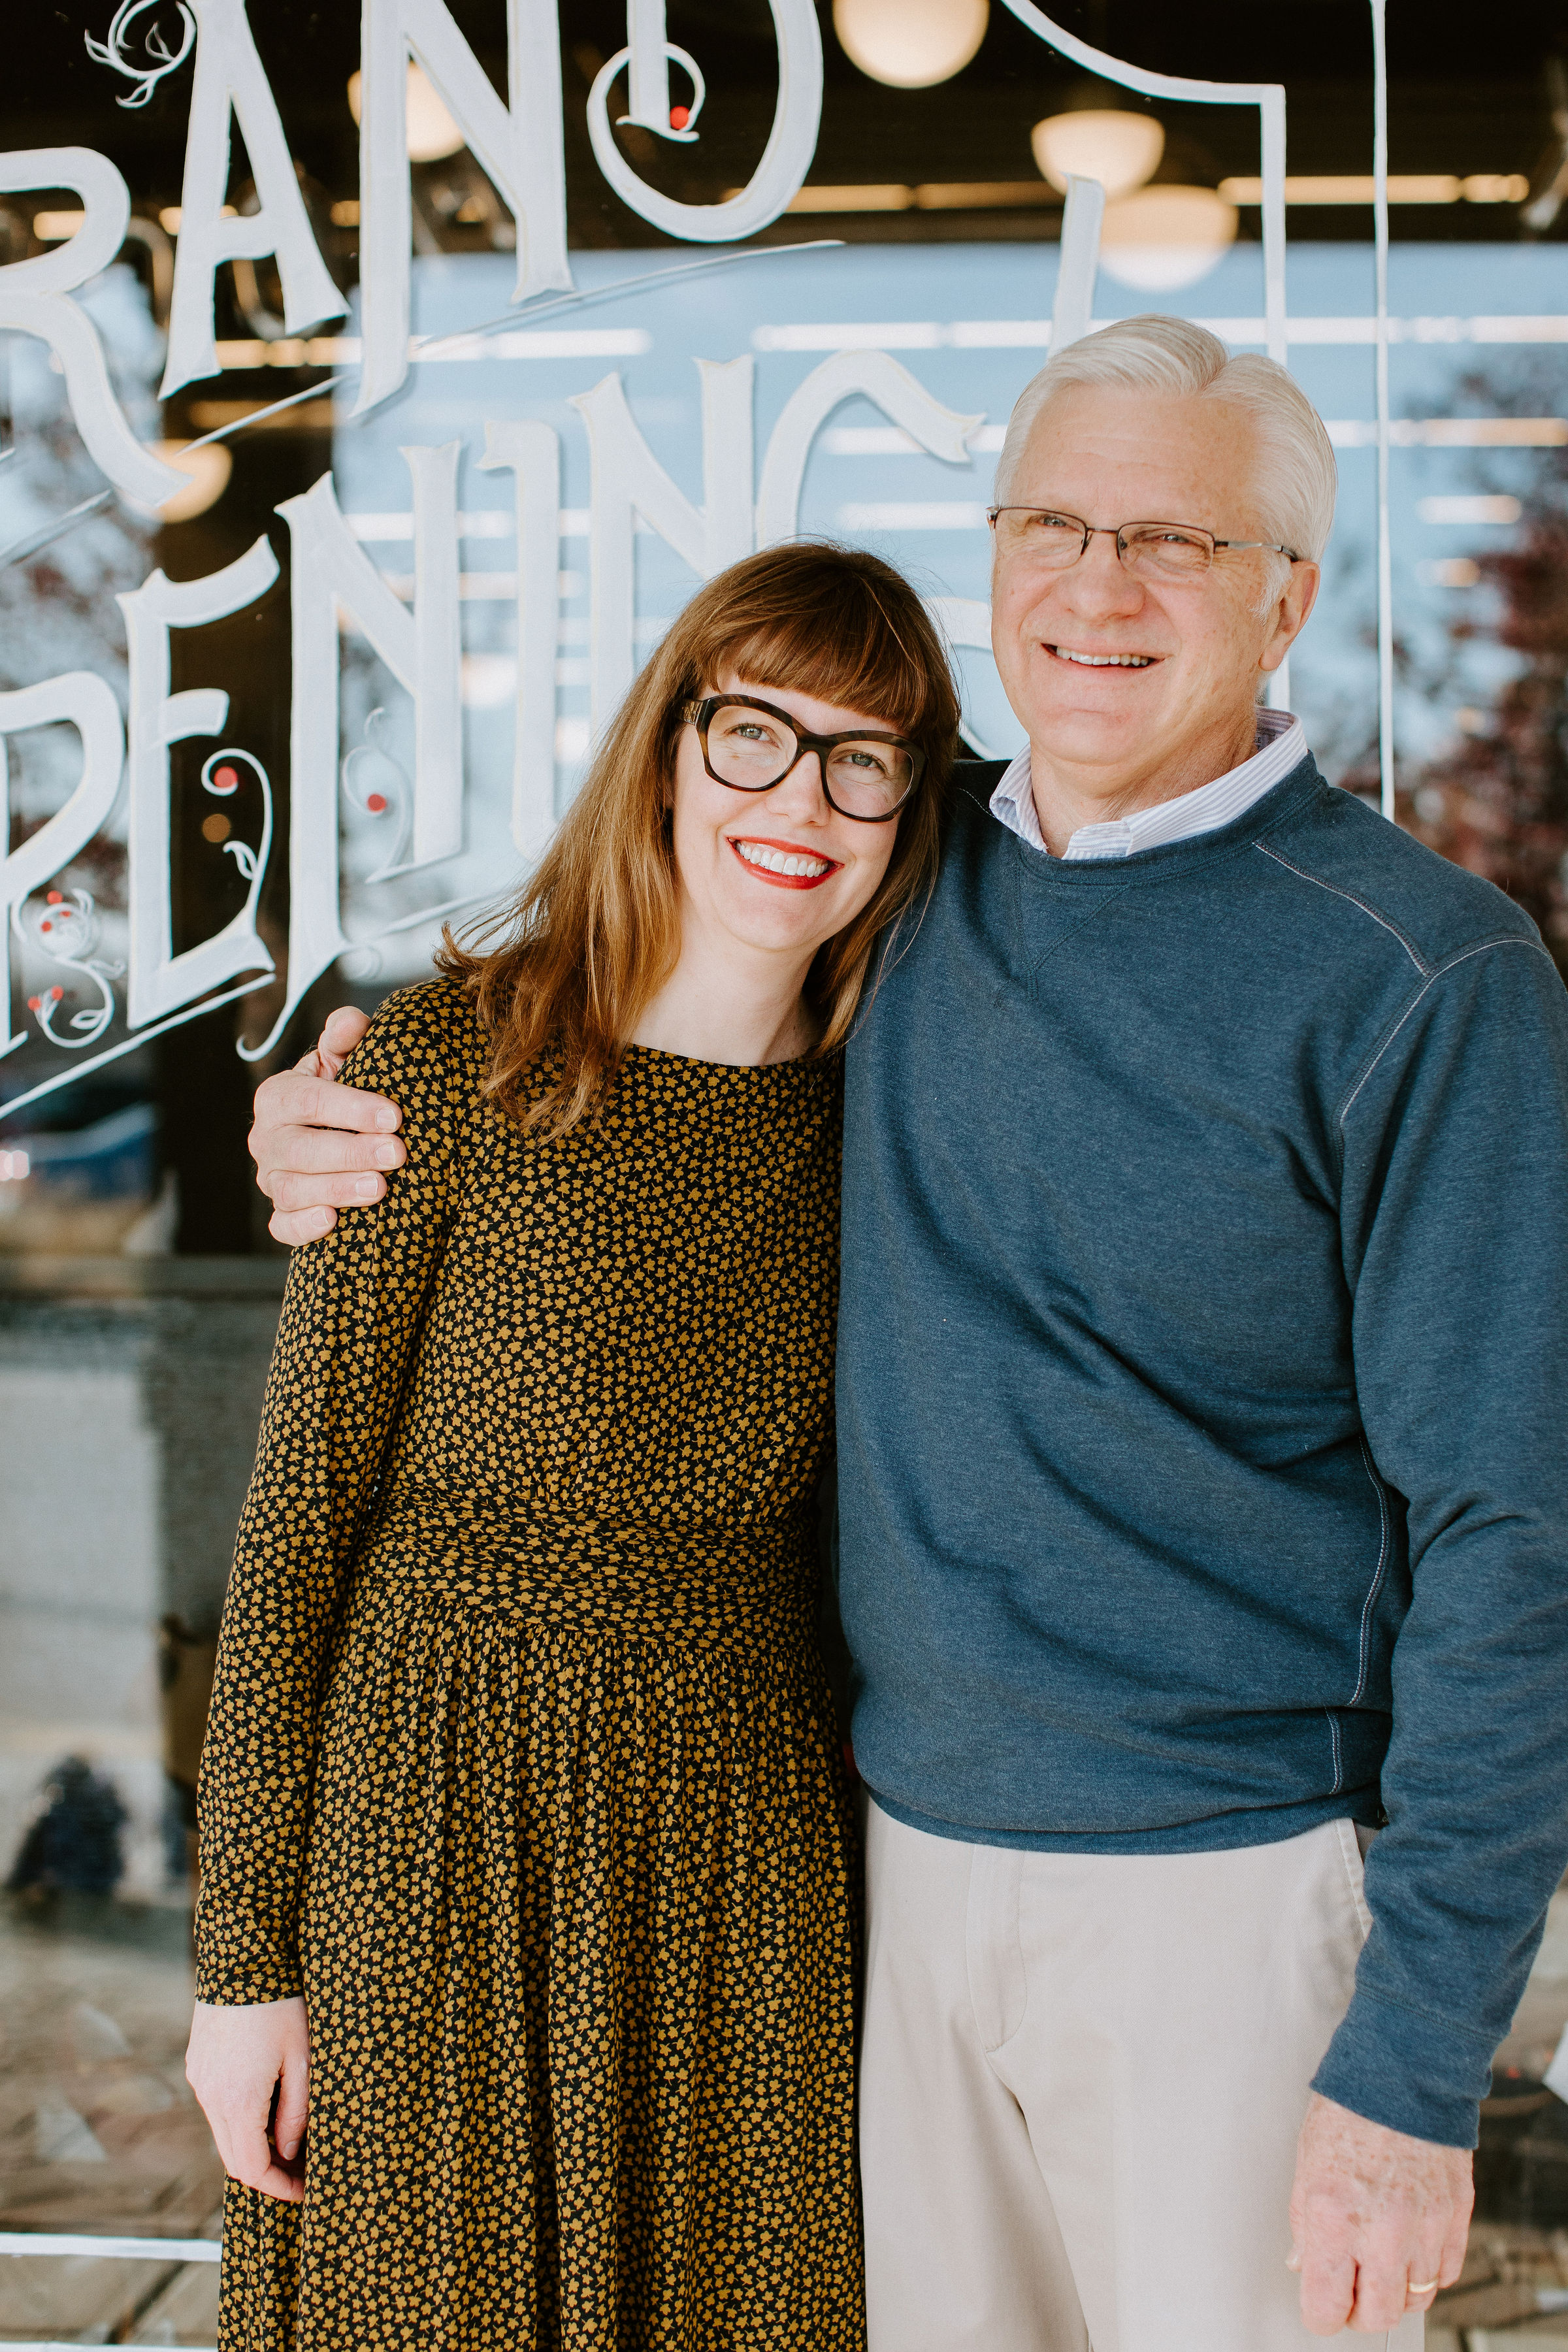 Owners (daugher and father), Molly Mast-Koss and Greg Mast